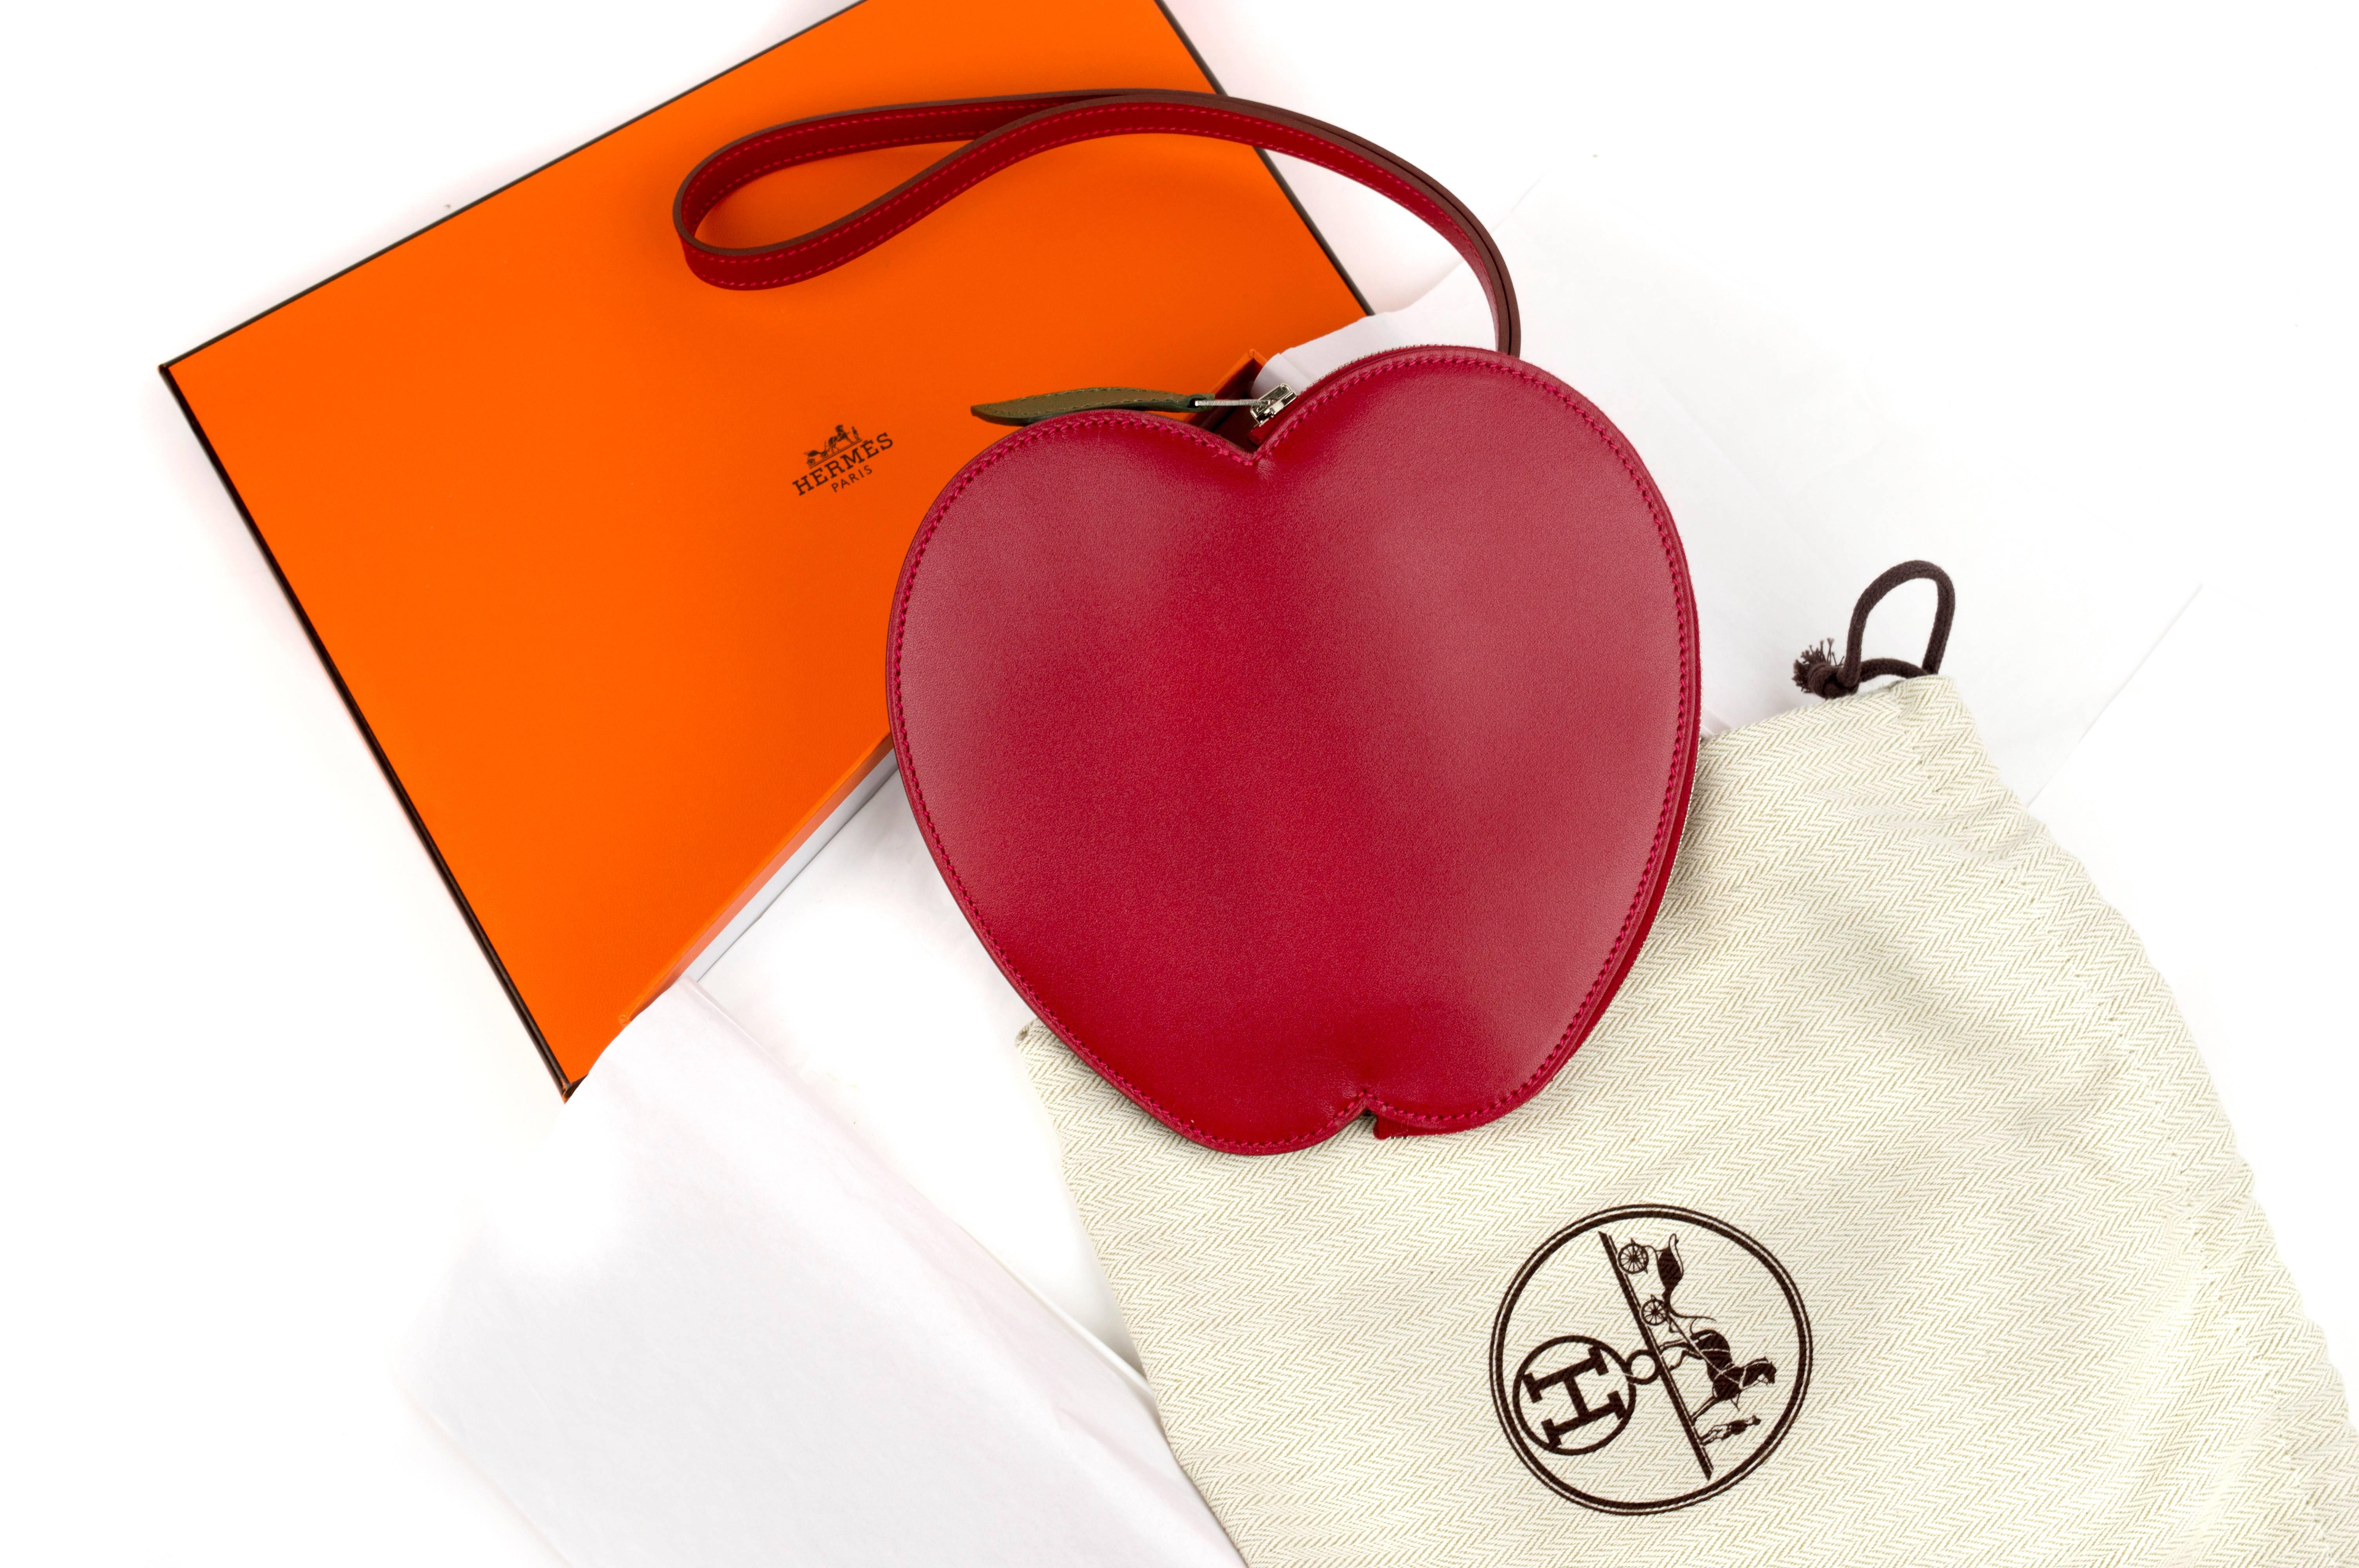 Brand New and never worn Hermes Tutti Frutti Apple Clutch from Hermes Tutti Frutti latest Spring/Summer 2016 collection released a very fun theme with a beautiful fruit. The small leather good is made of different materials such as Tadelakt leather